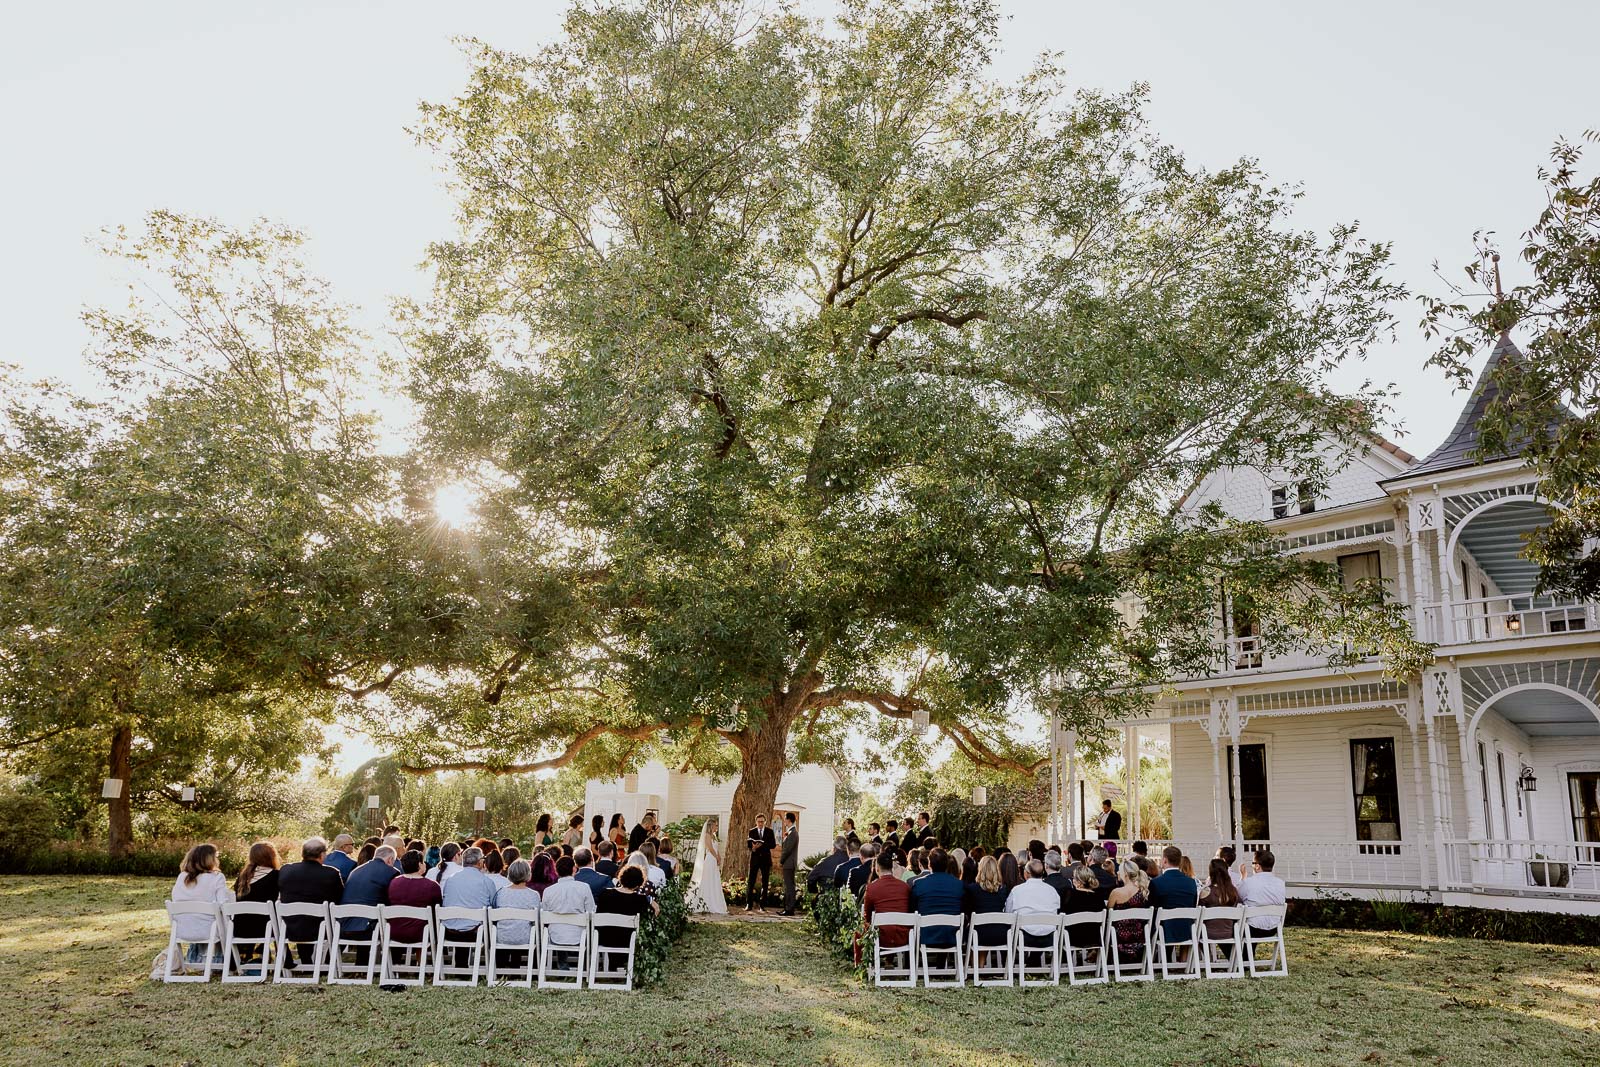 A super wide angle view of a wedding taking place with the old house on the right and oak tree in the middle at Barr Mansion